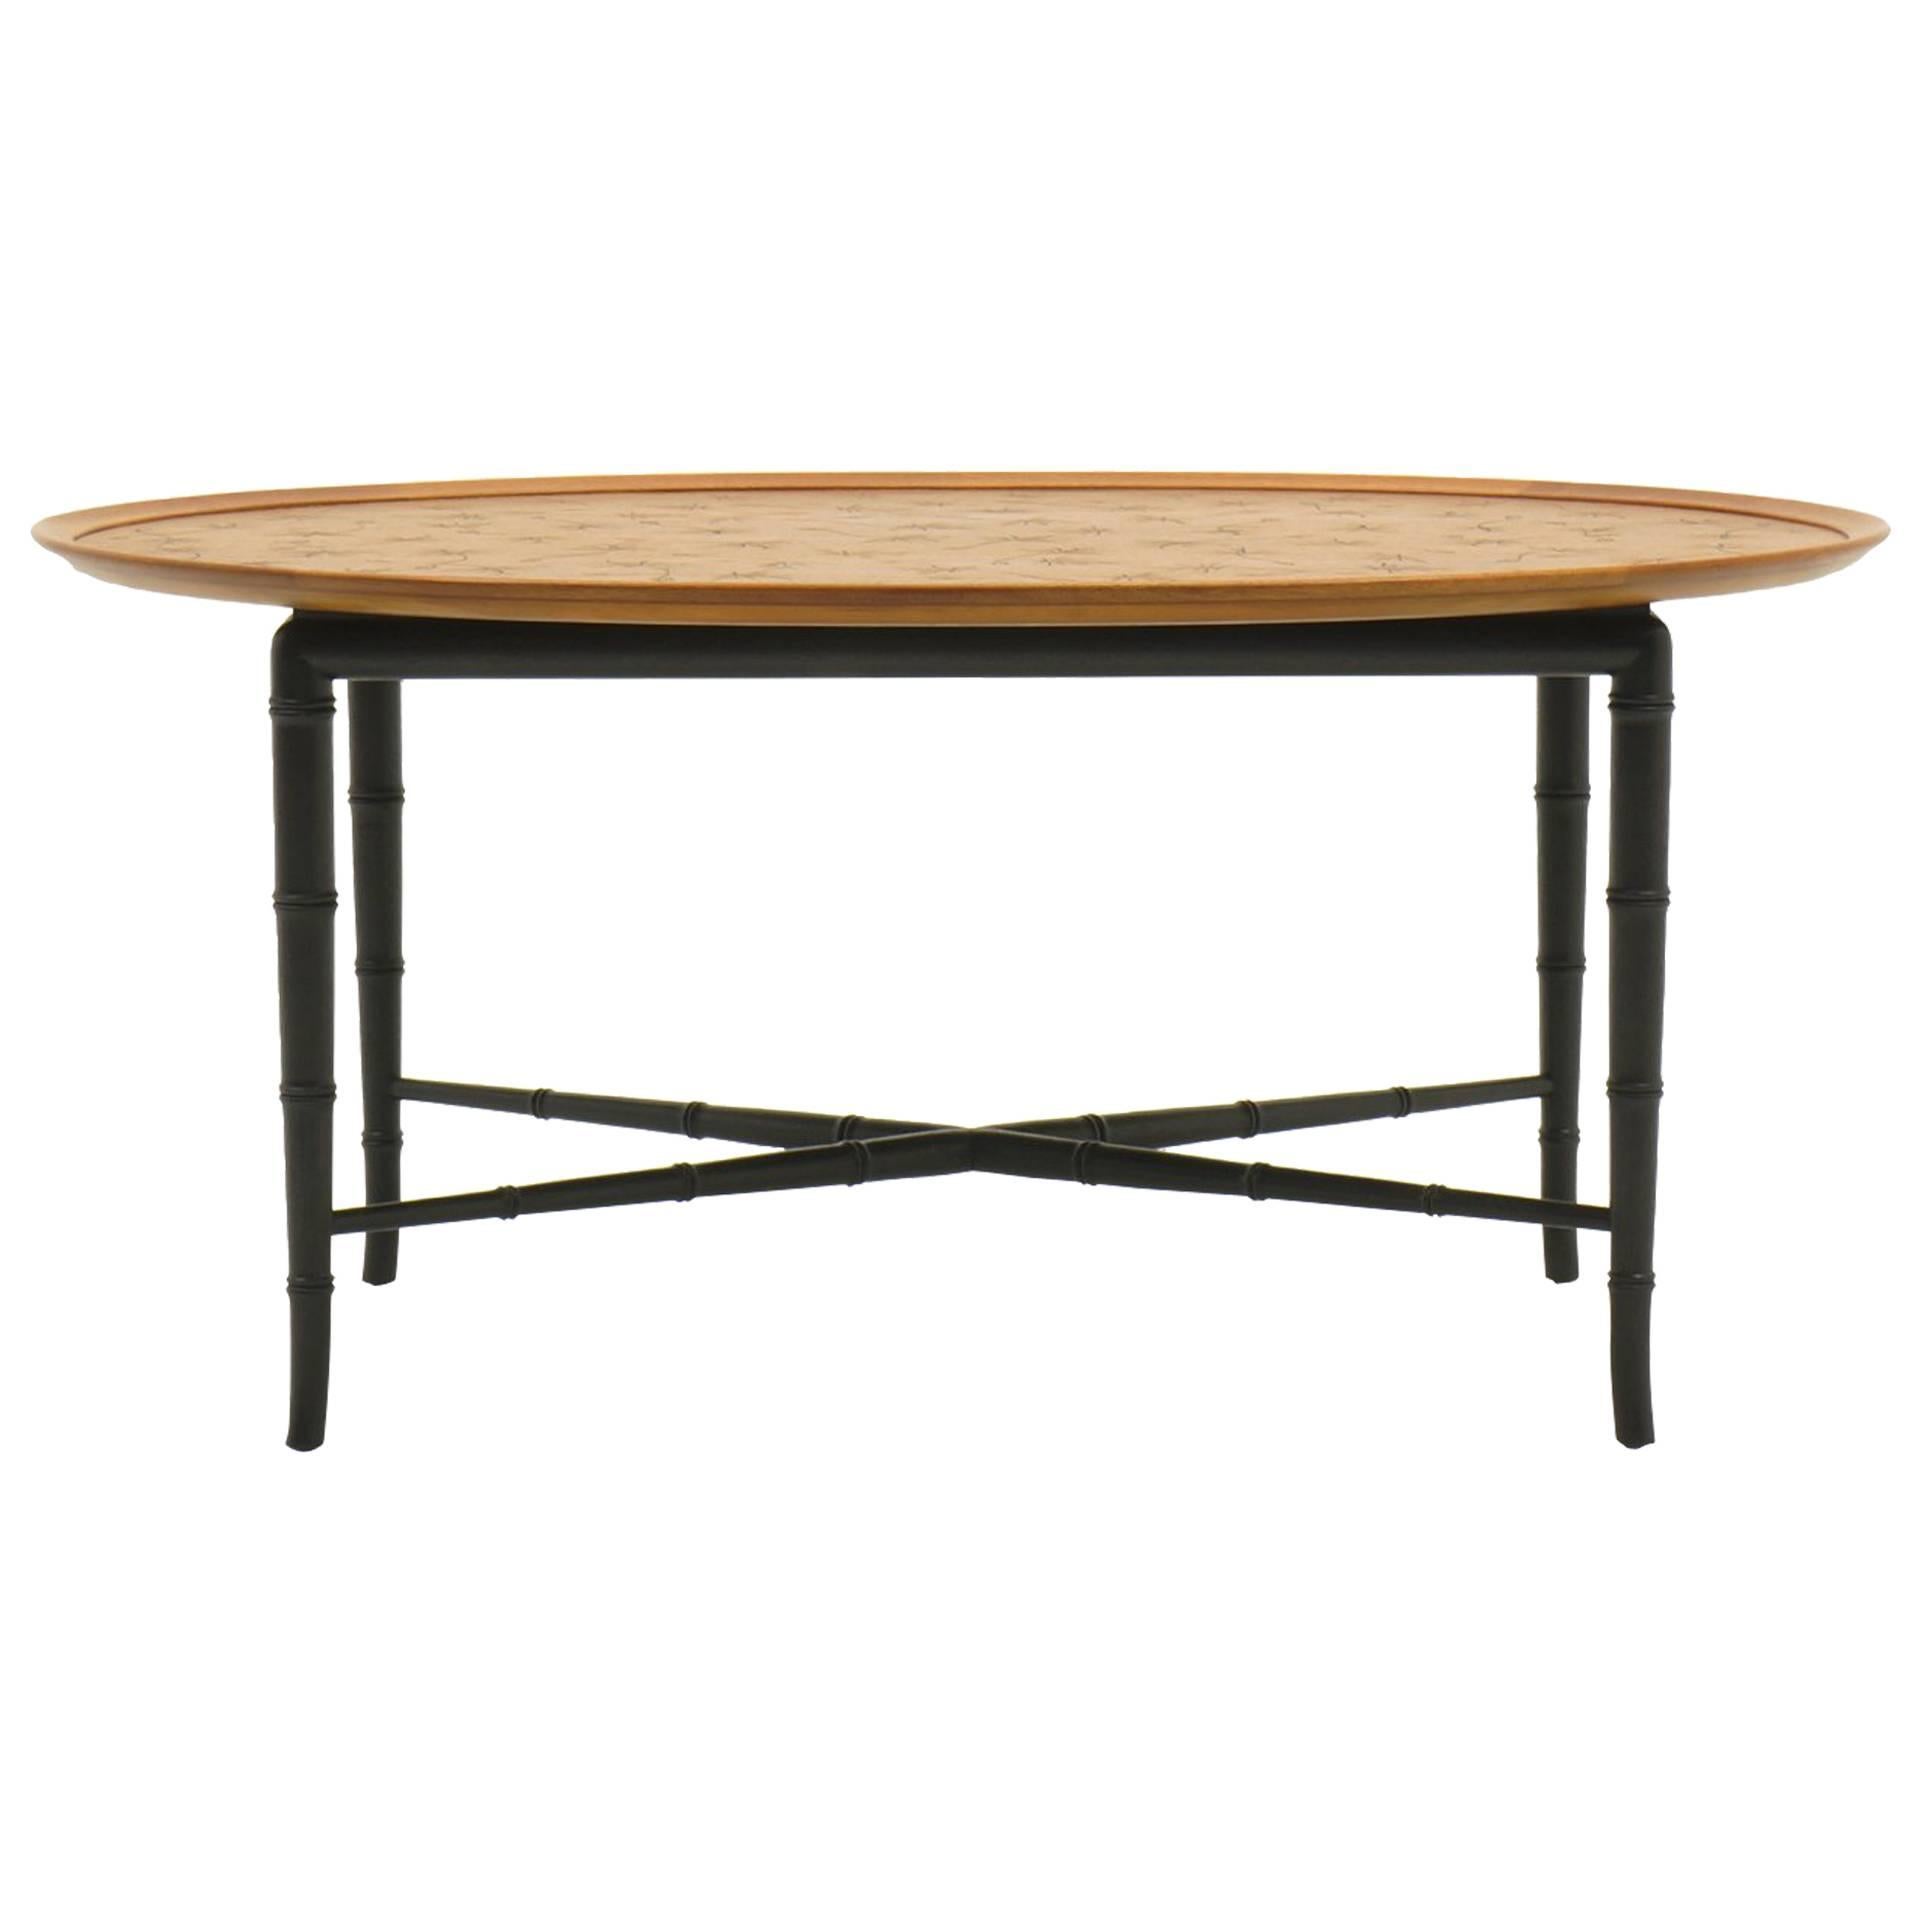 Kittinger Coffee Table with Faux Bamboo Legs Incised Design on Top